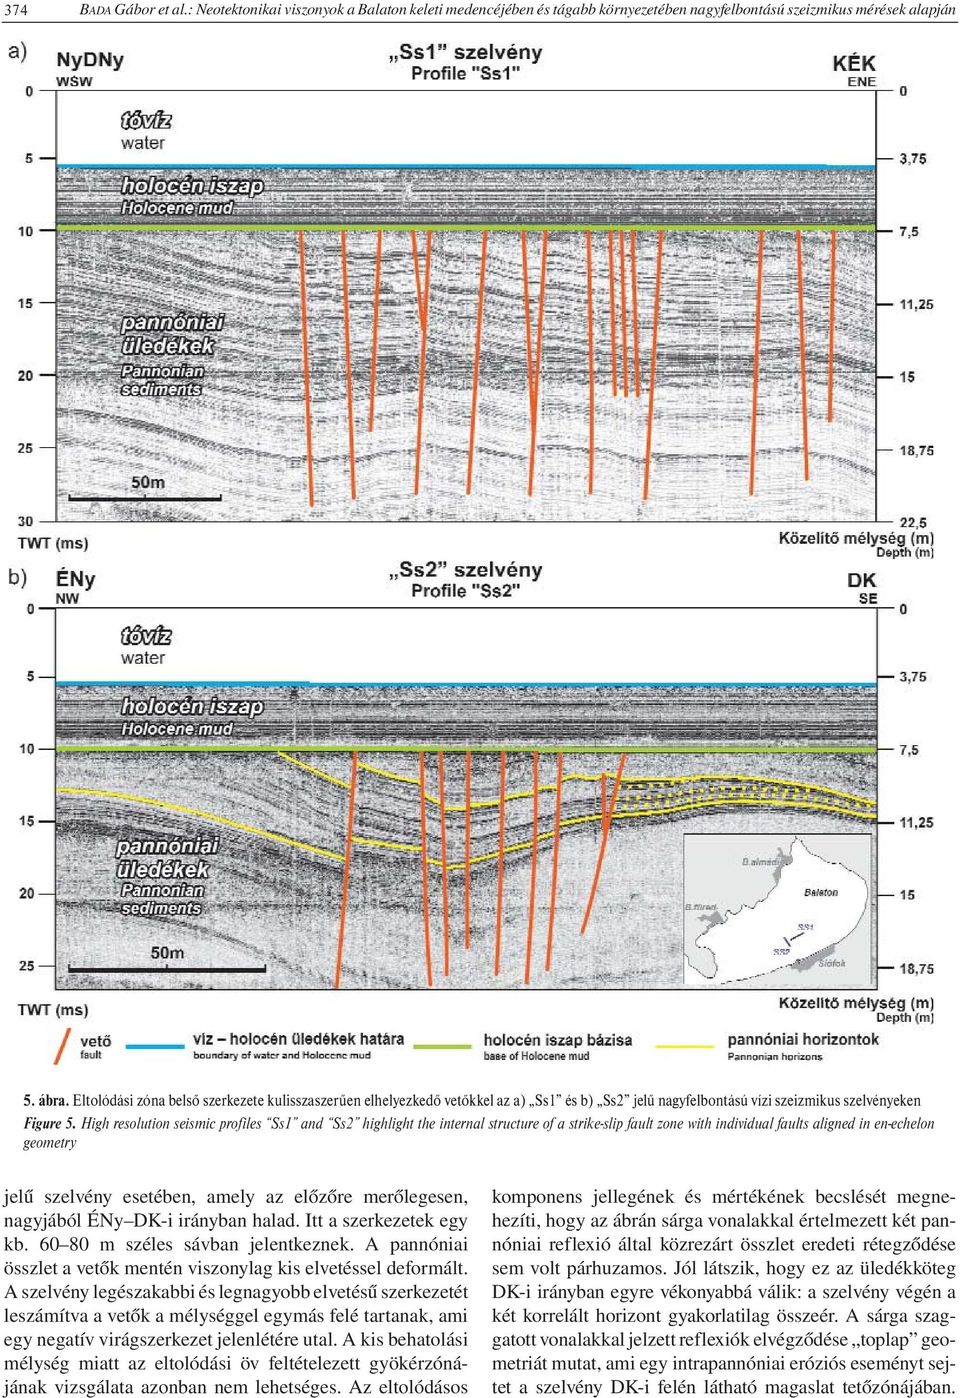 High resolution seismic profiles Ss1 and Ss2 highlight the internal structure of a strike-slip fault zone with individual faults aligned in en-echelon geometry jelű szelvény esetében, amely az